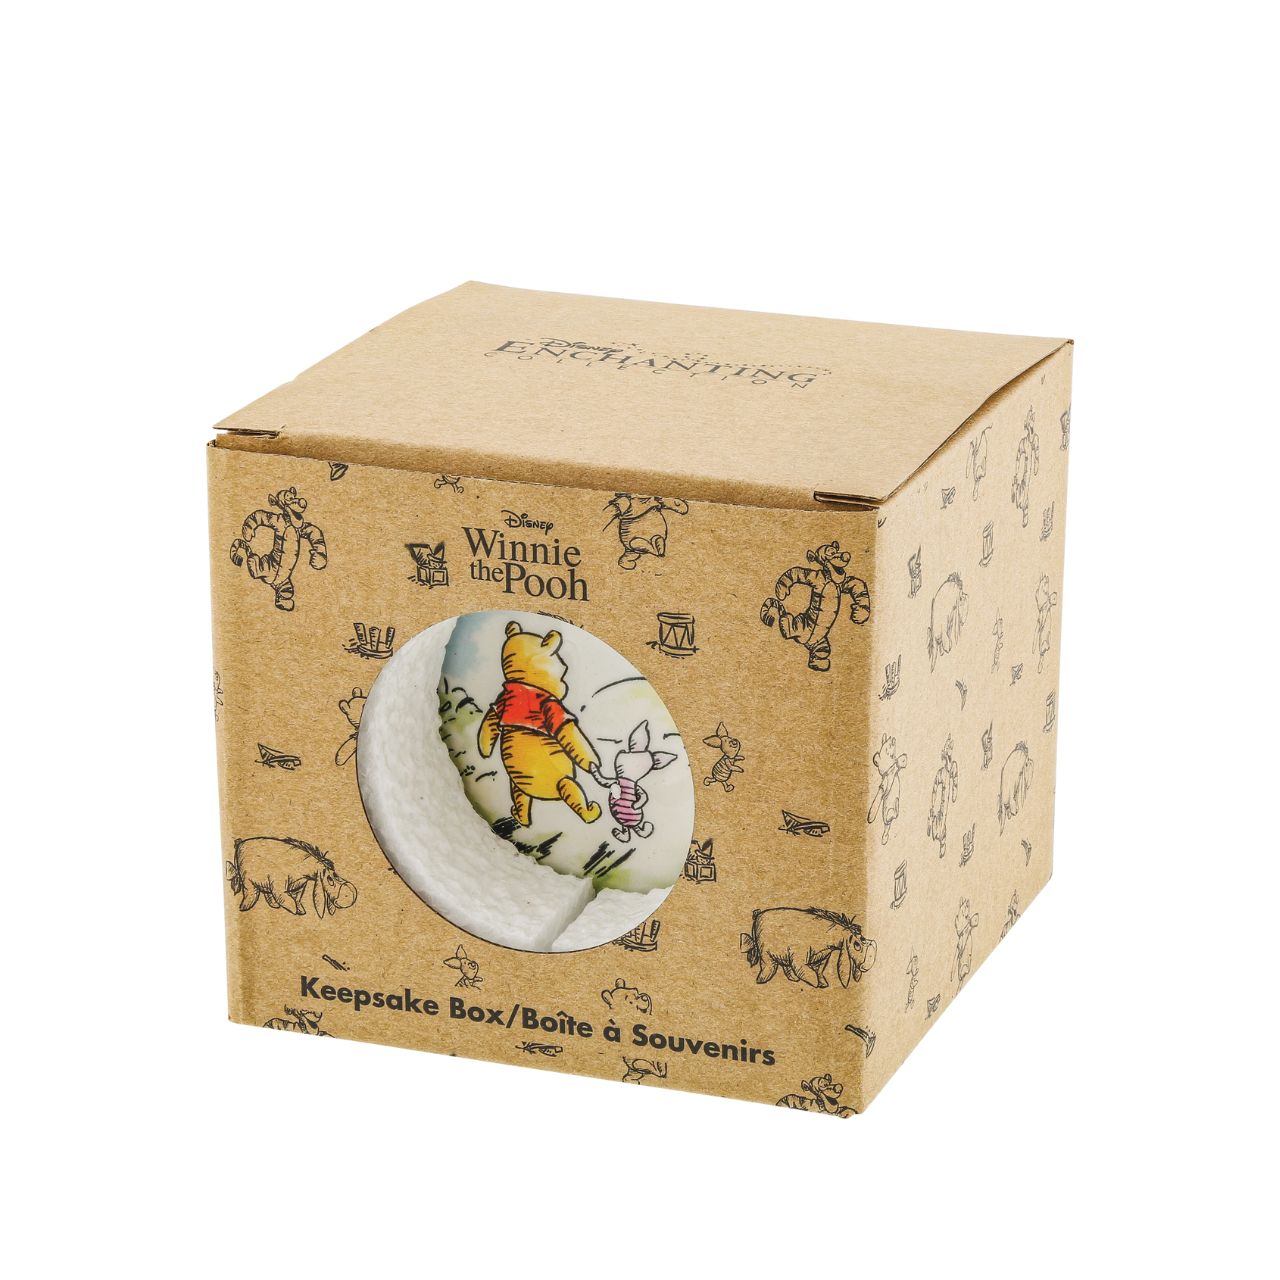 Disney Winnie The Pooh Keepsake Box  Designed with new parents in mind, this is a lovely way to keep memories of those early baby days safe. This cute Winnie the Pooh ceramic, keepsake box is perfect for those special tokens that can be stored carefully away and looked over fondly as your child grows.